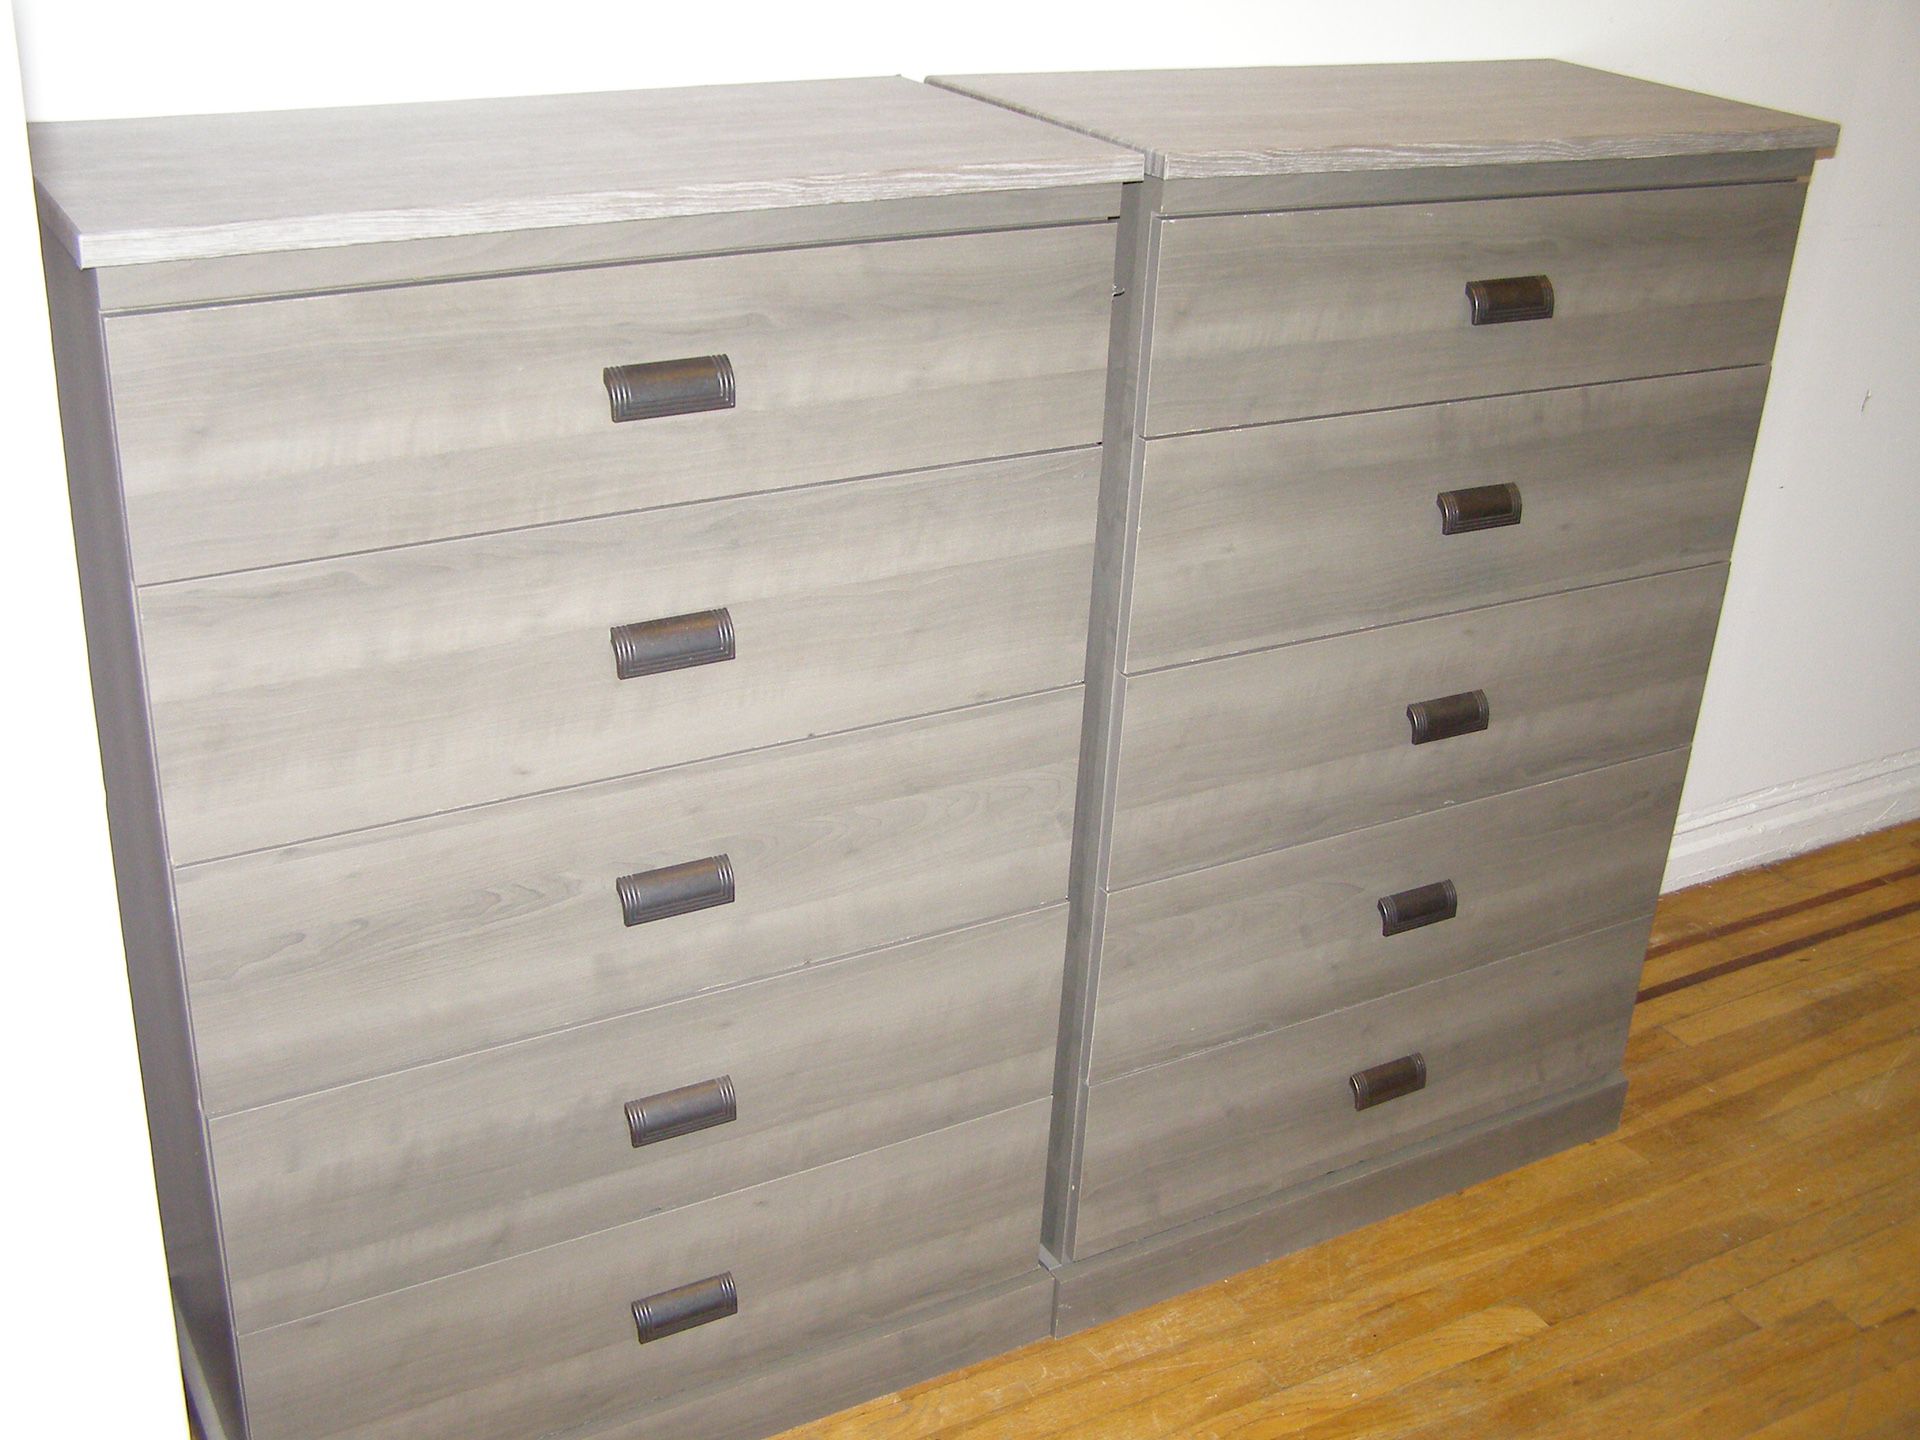 5 Drawer Chest Dresser - Excellent Cond. - Delivery Available